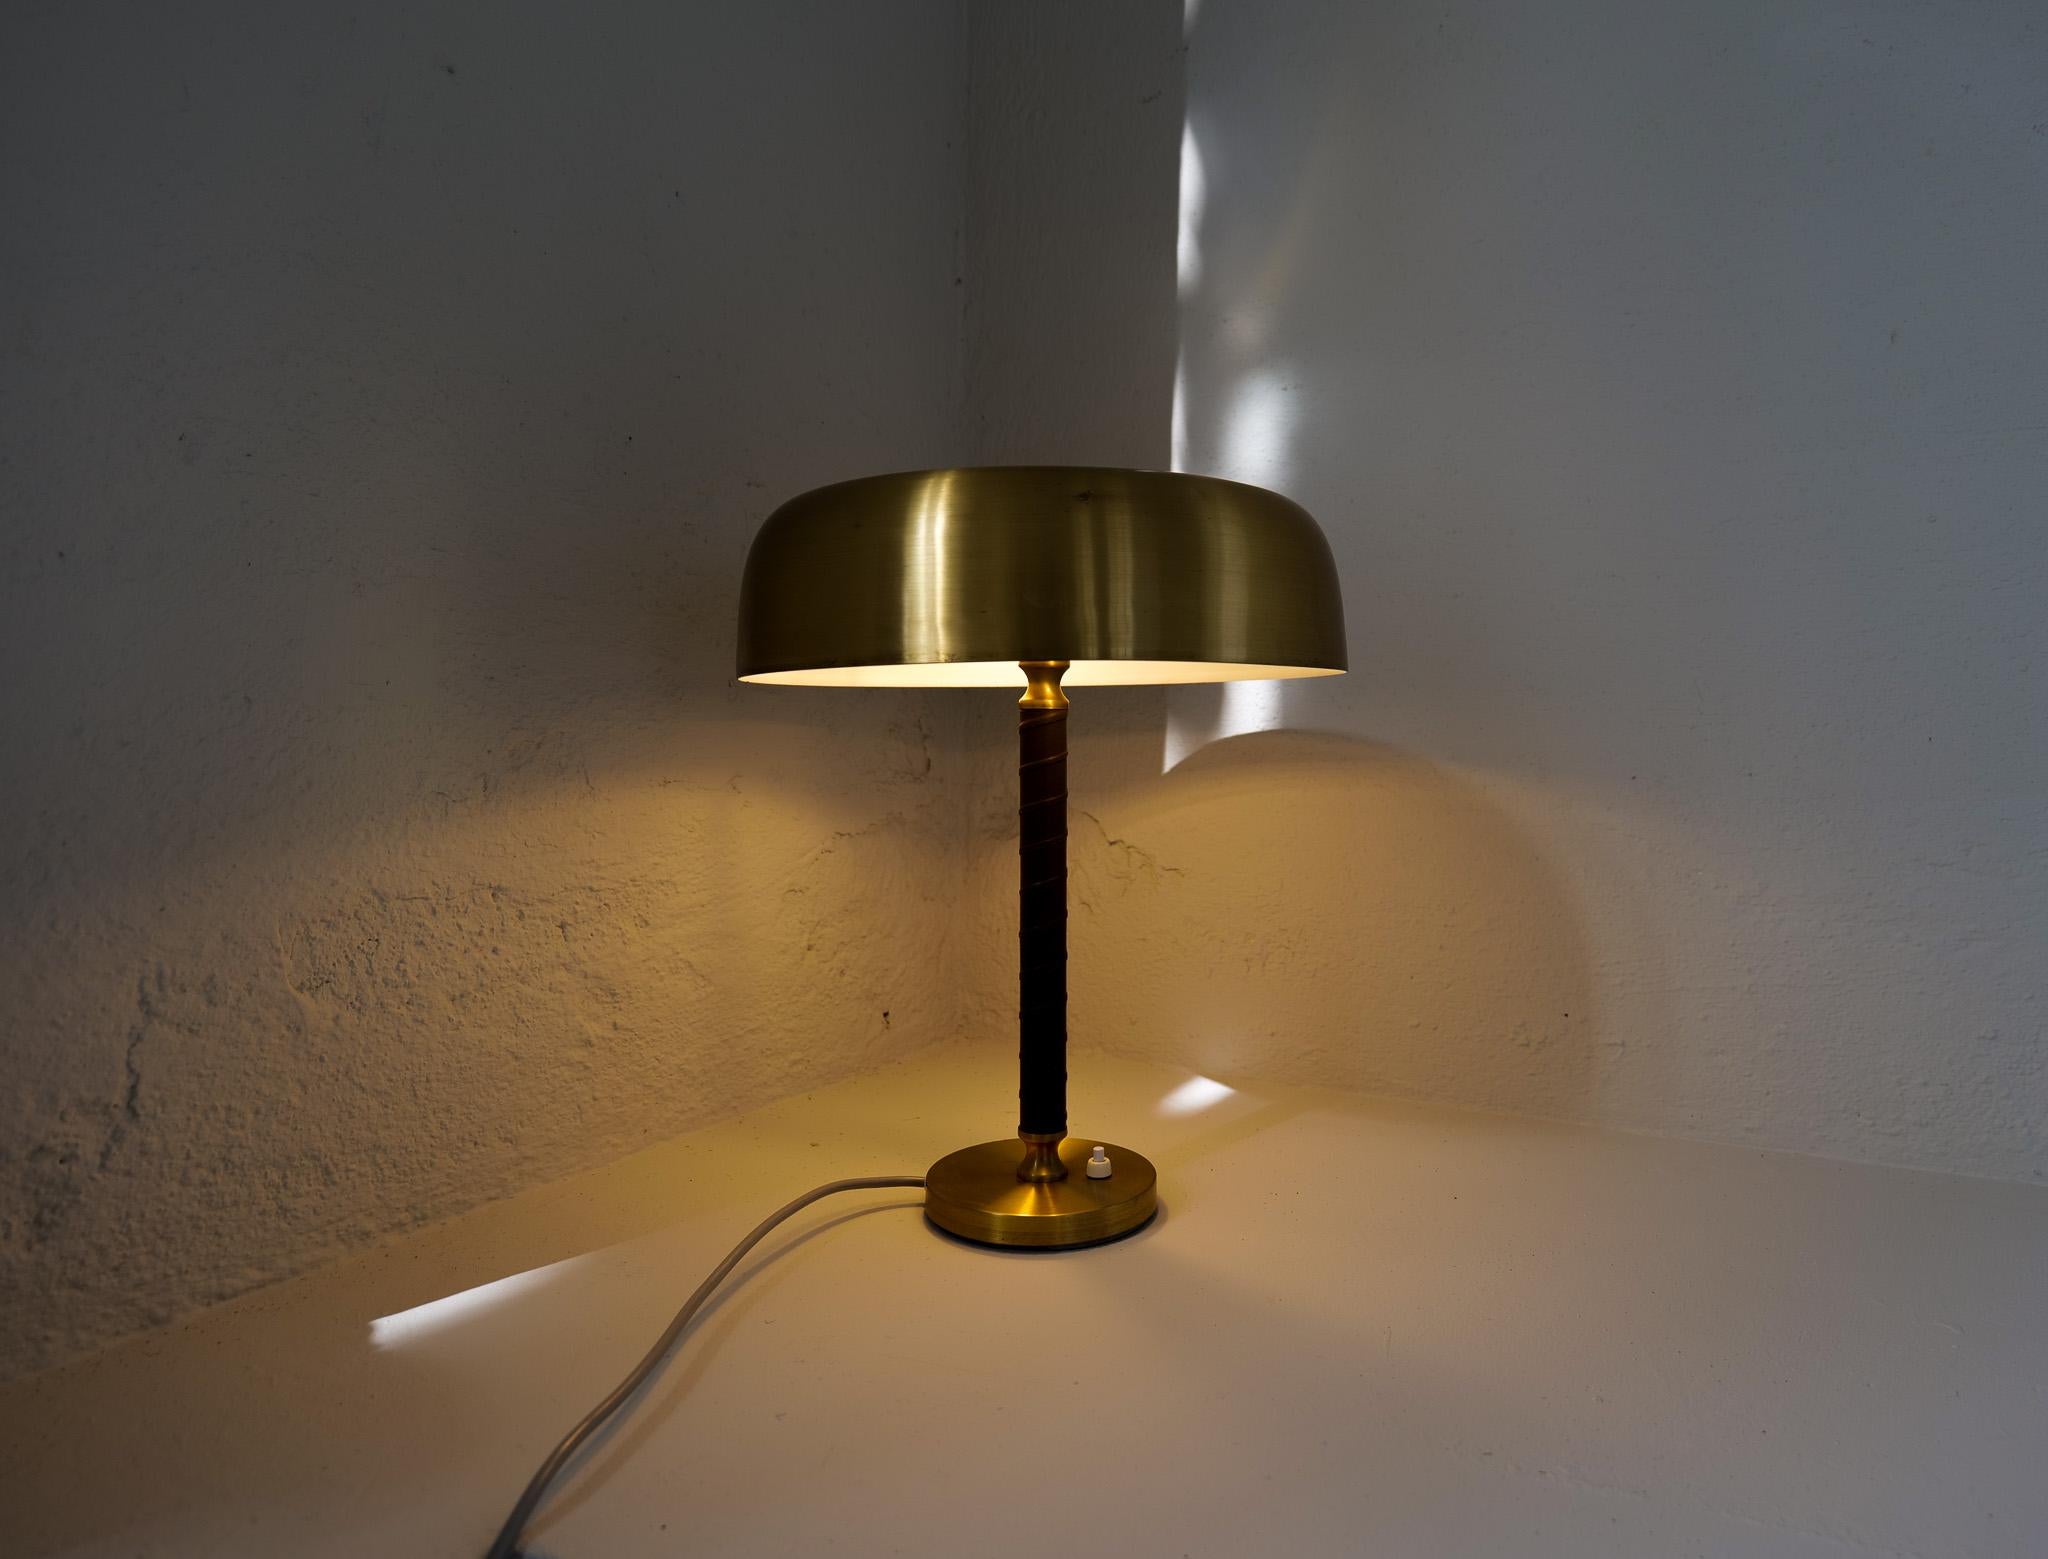 Midcentury Modern Table Lamp in Brass and Leather by Boréns, Sweden, 1960s For Sale 5